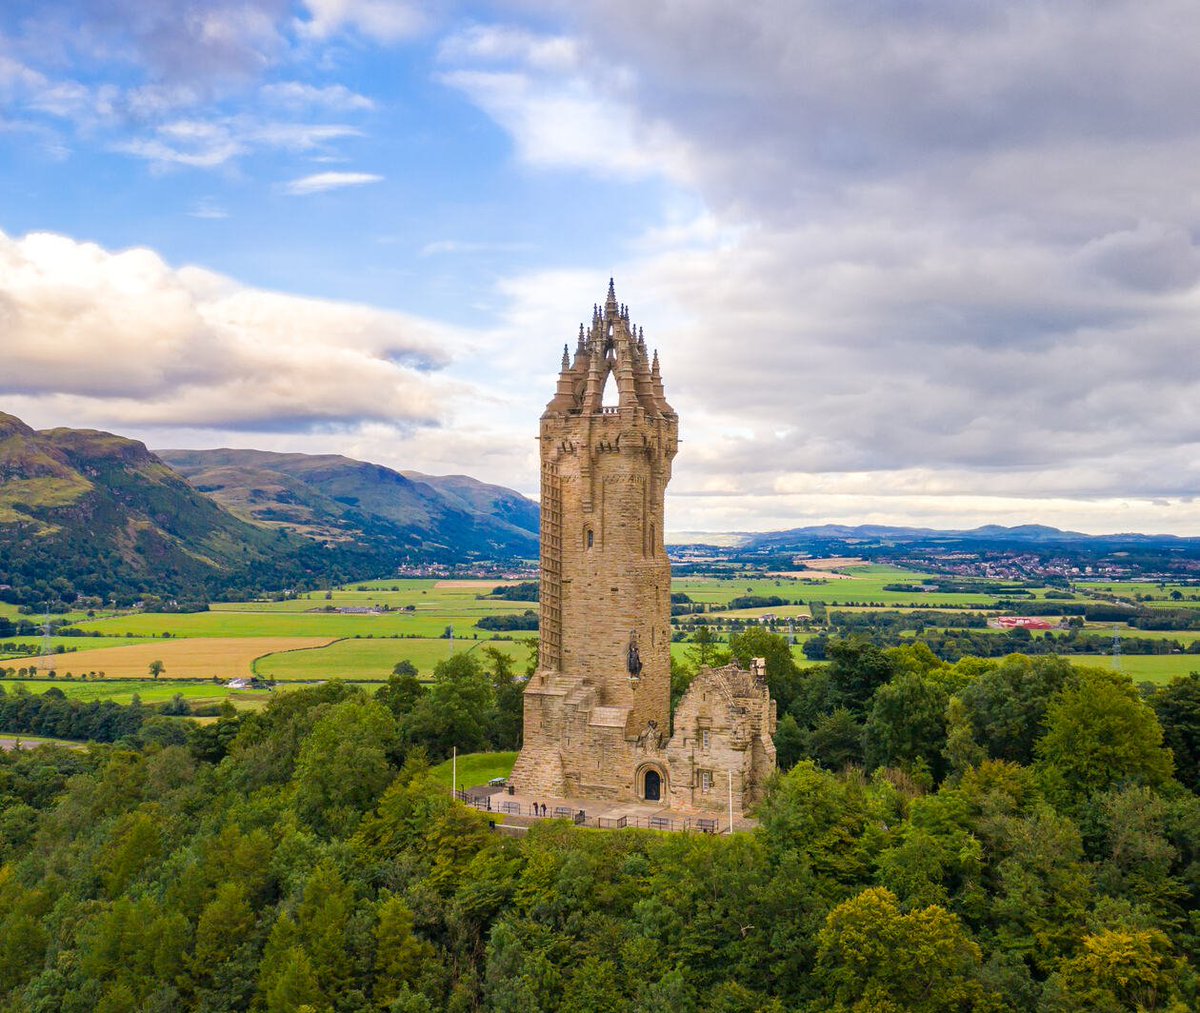 Dive into Stirling's history with our free online course 'Heart of Scotland: History & Heritage of Stirling at 900 Years'. Starts June 24 for 4 weeks 👇 futurelearn.com/courses/heart-… @FutureLearn @StirlingCouncil #Stirling900 #FutureLearn #HeartOfScotland #StirlingHistory